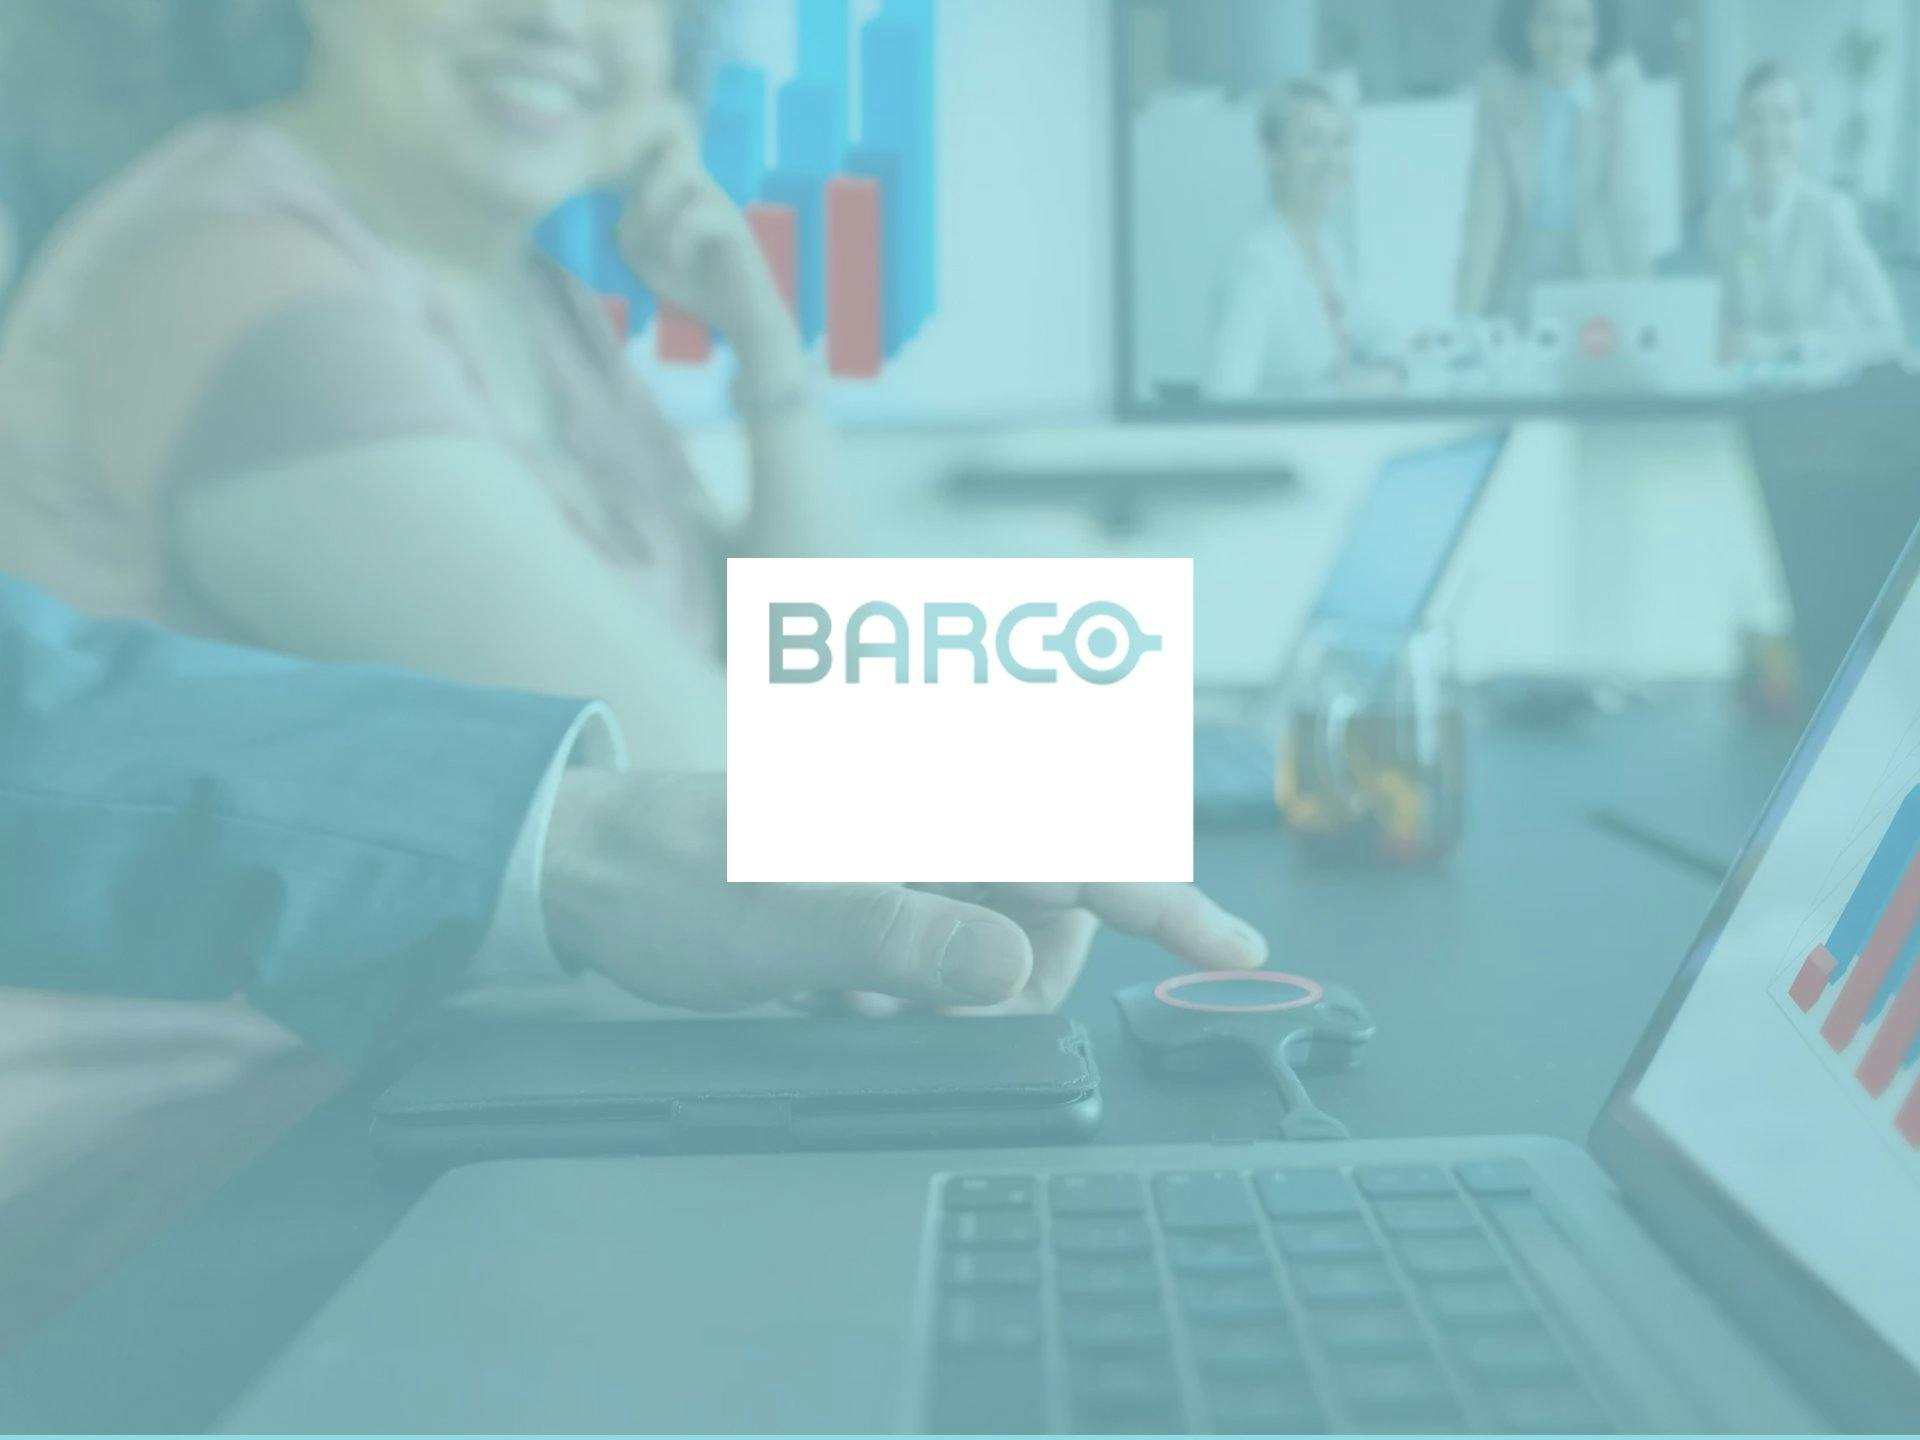 Barco card image